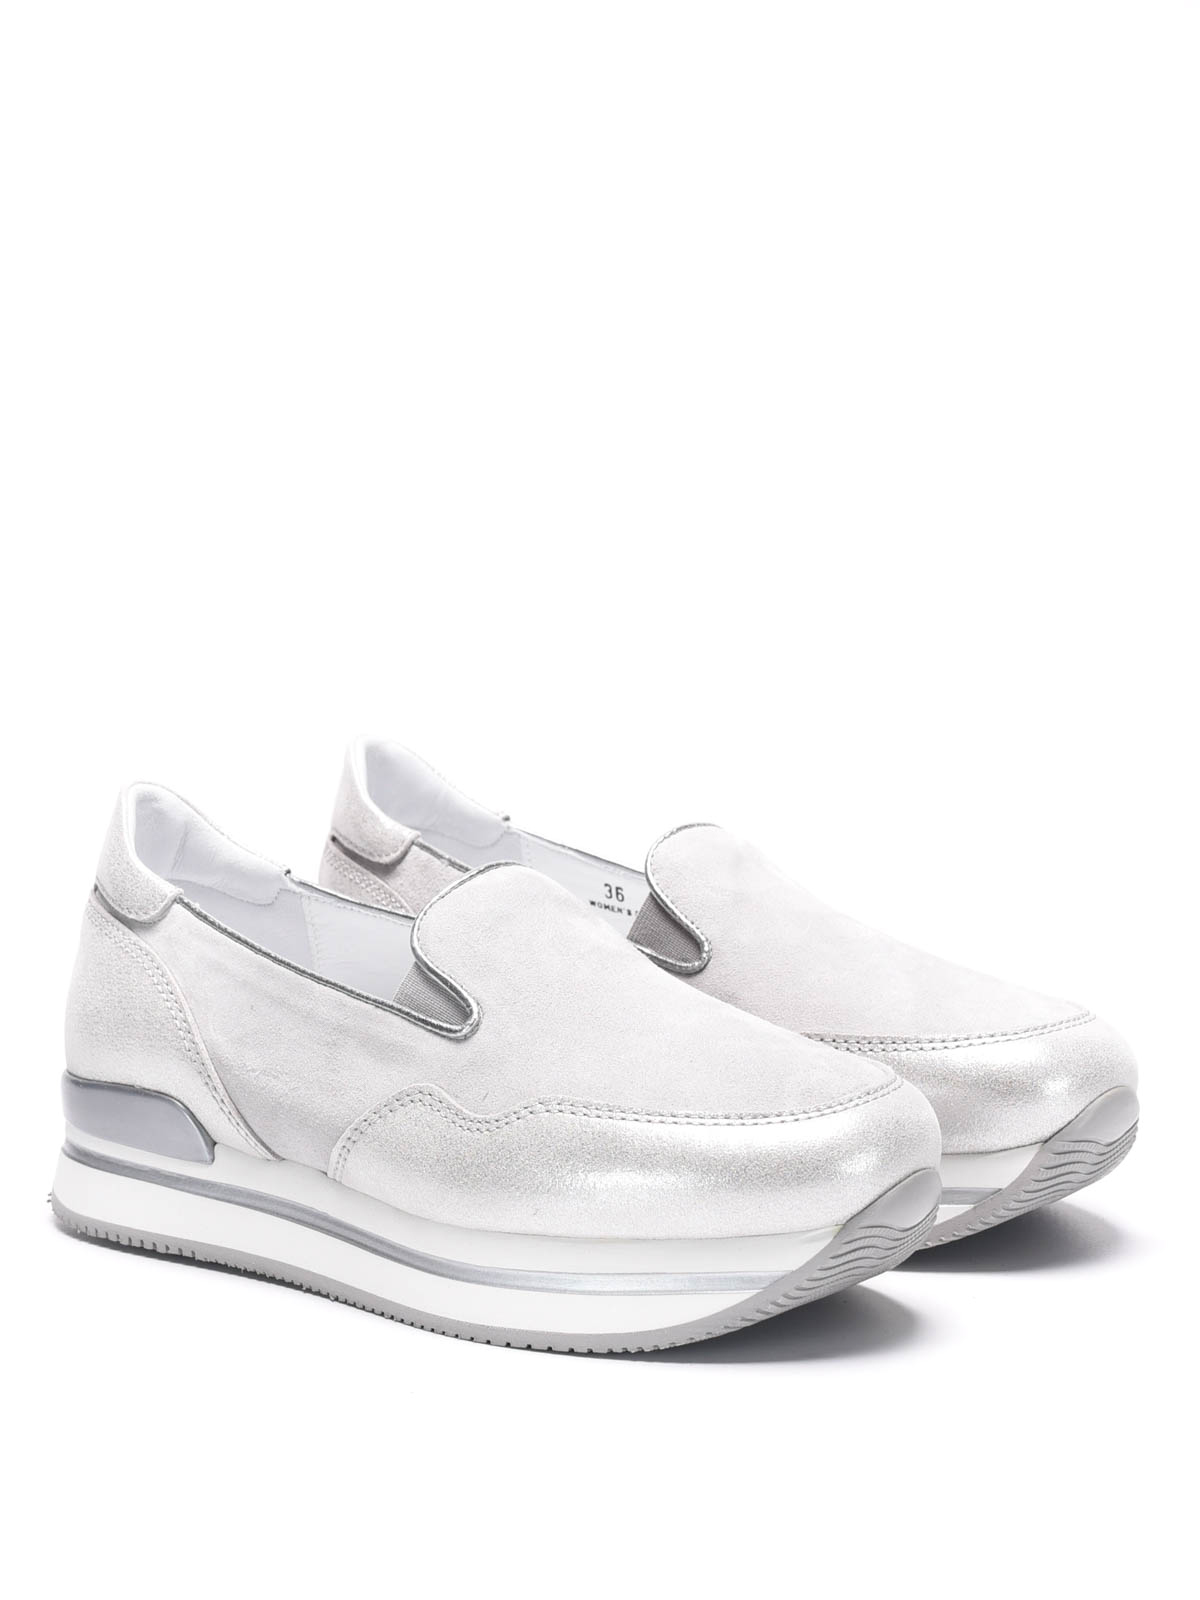 Hogan - H222 slip-on sneakers - trainers - HXW2220T67184Y109A | iKRIX.com